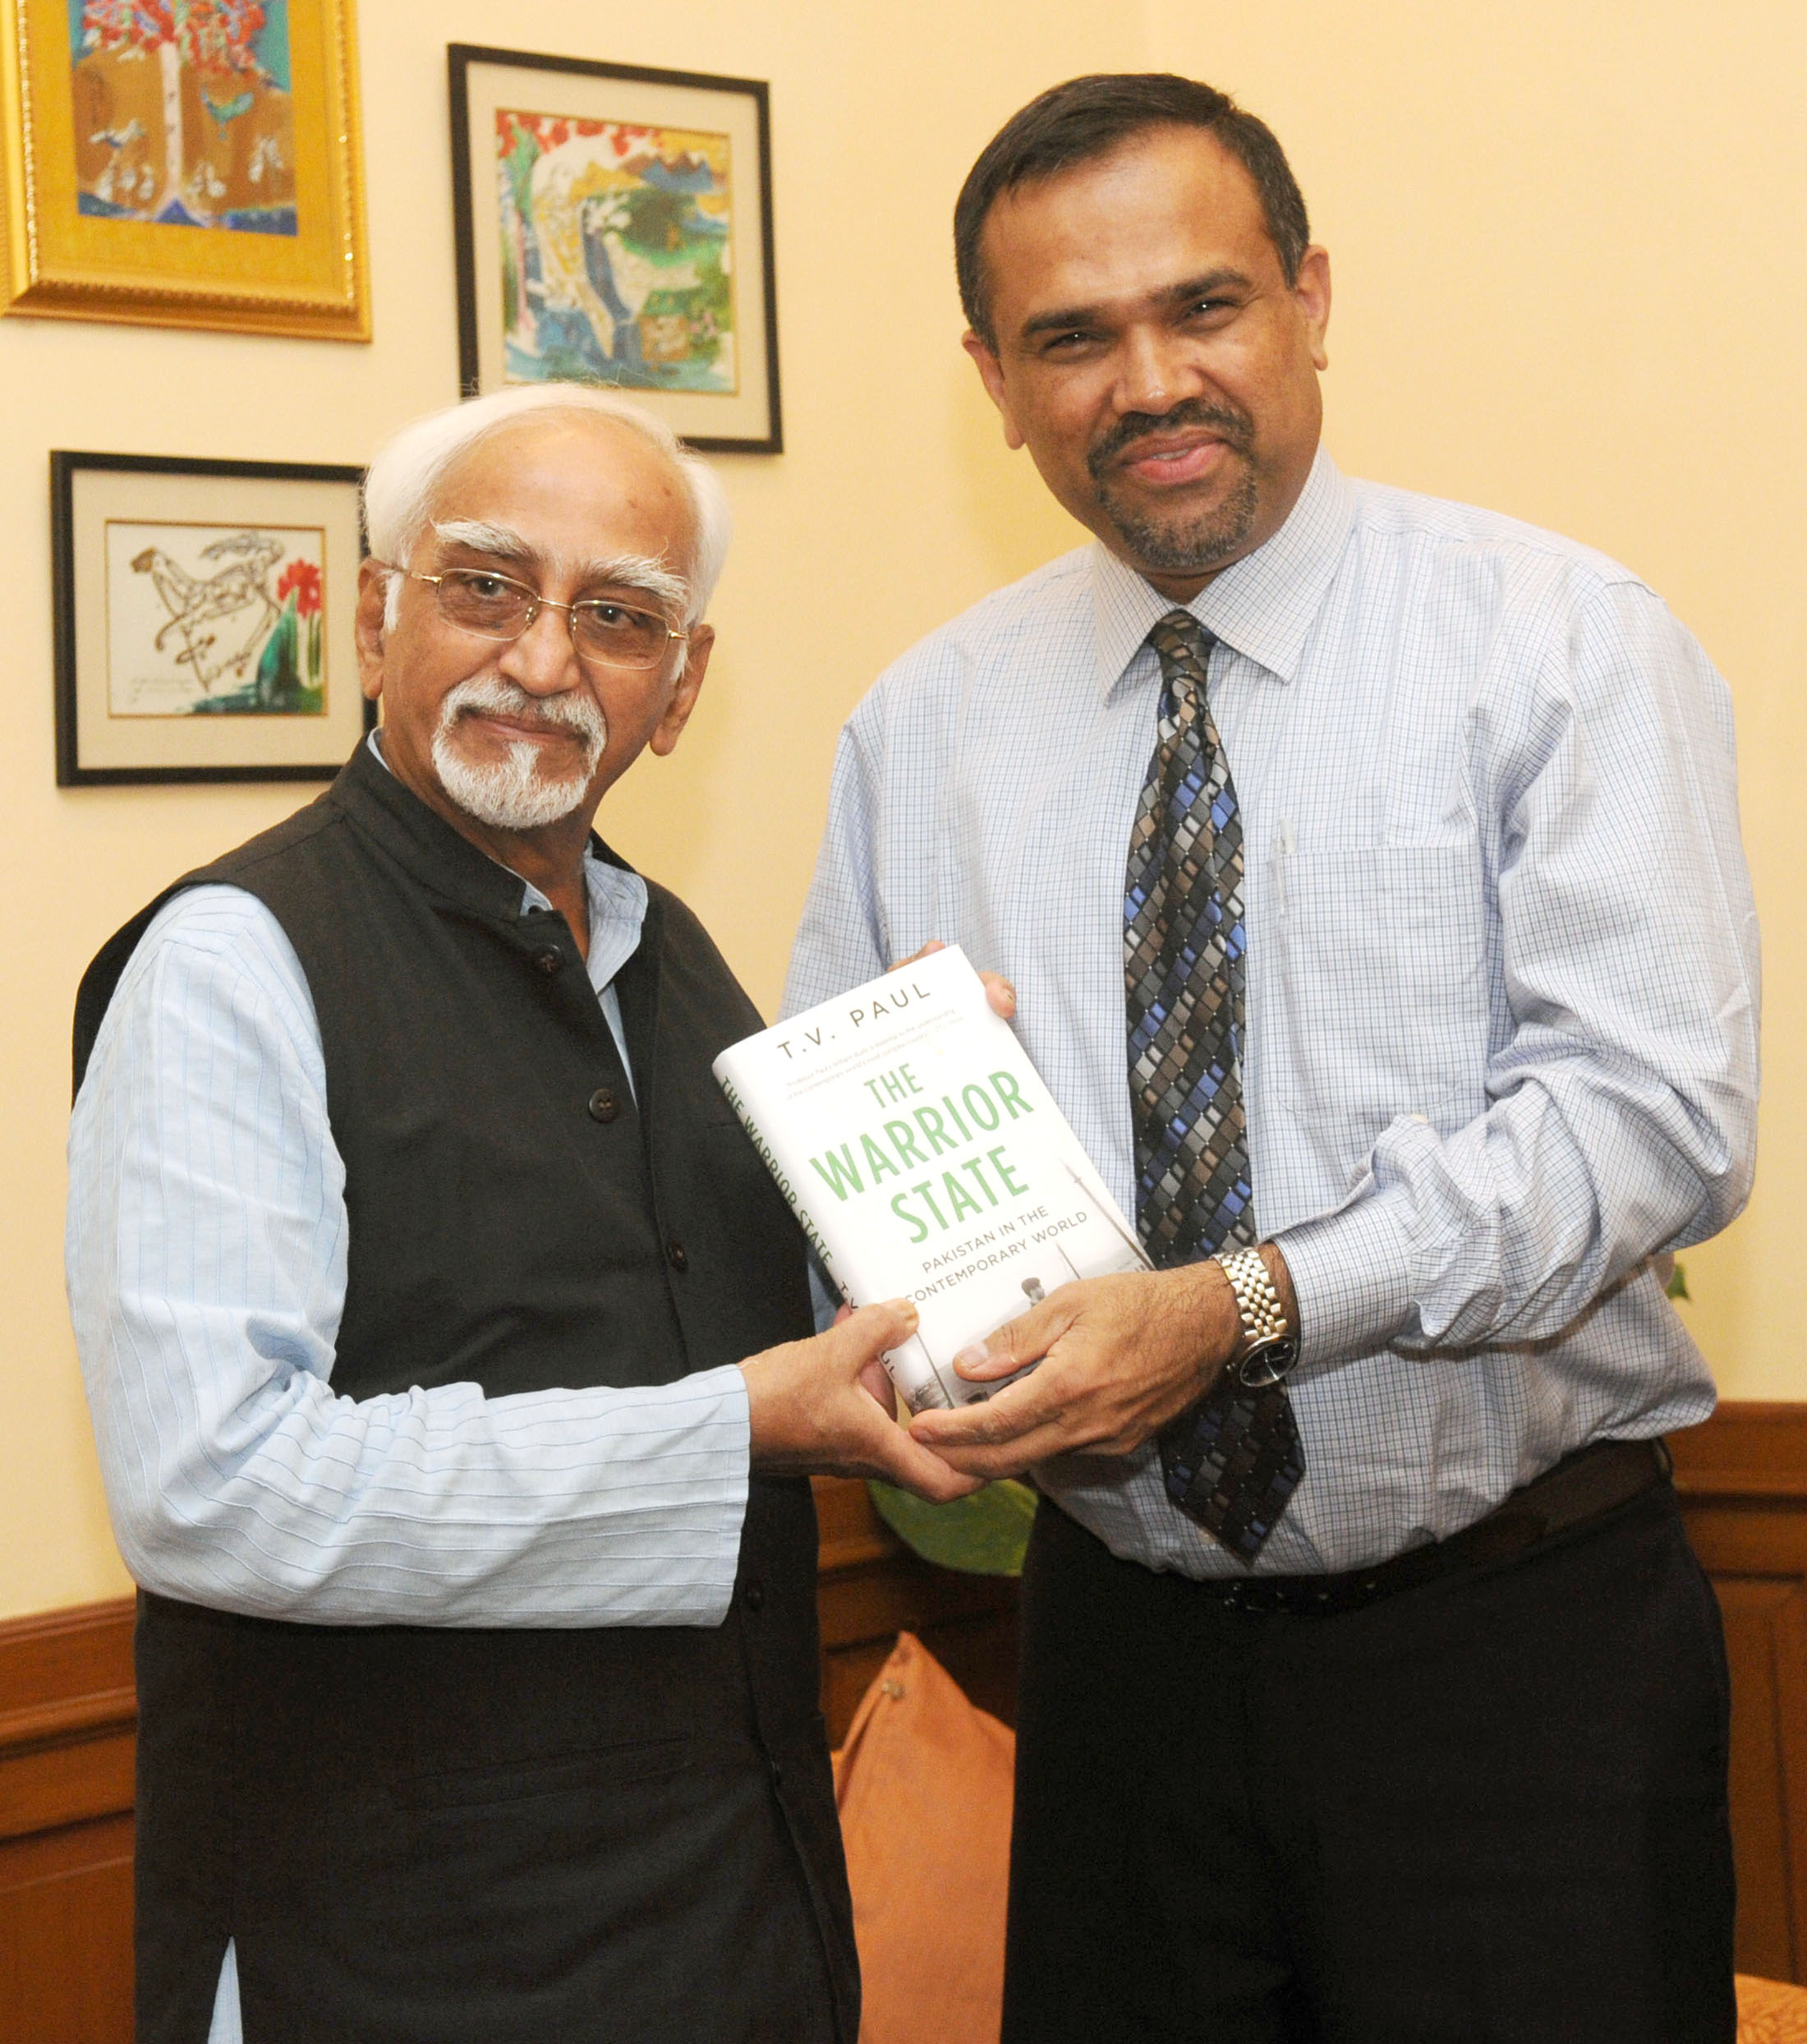 T.V. Paul presents a copy of "The Warrior State: Pakistan in the Contemporary World" to Mohammad Hamid Ansari, Vice President of India, in New Delhi on June 13, 2014.